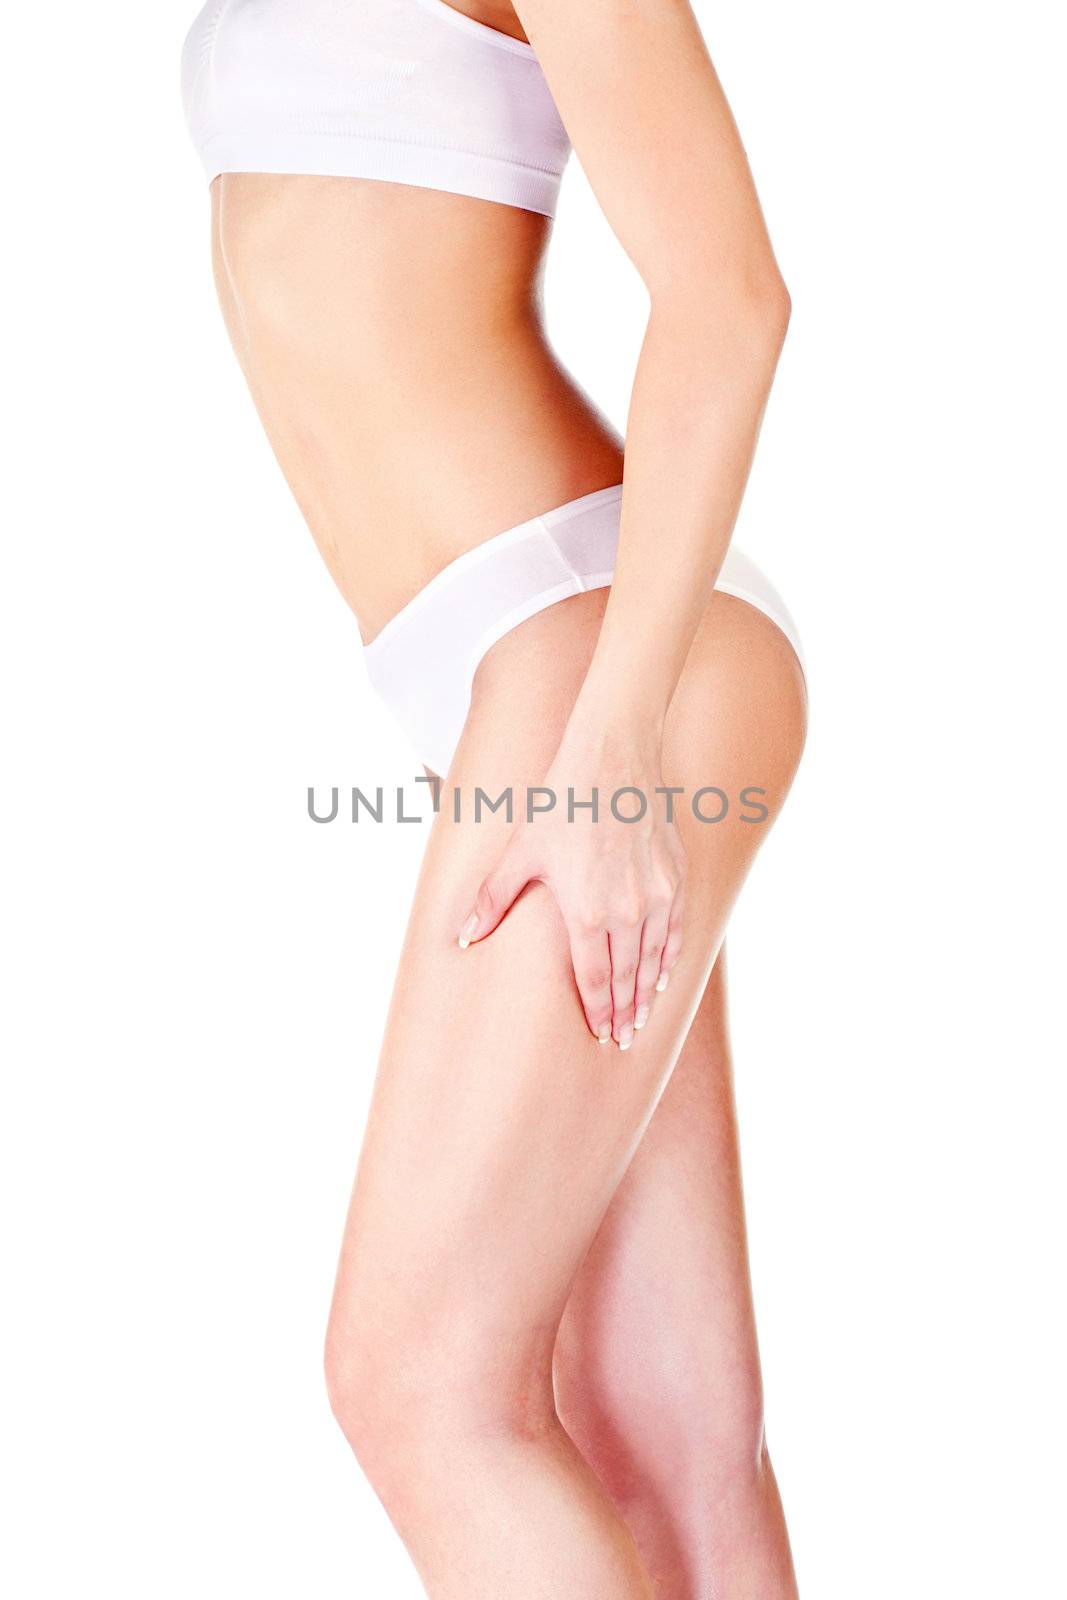 Woman pinching leg for skin fold test, isolated on white. Health concept 